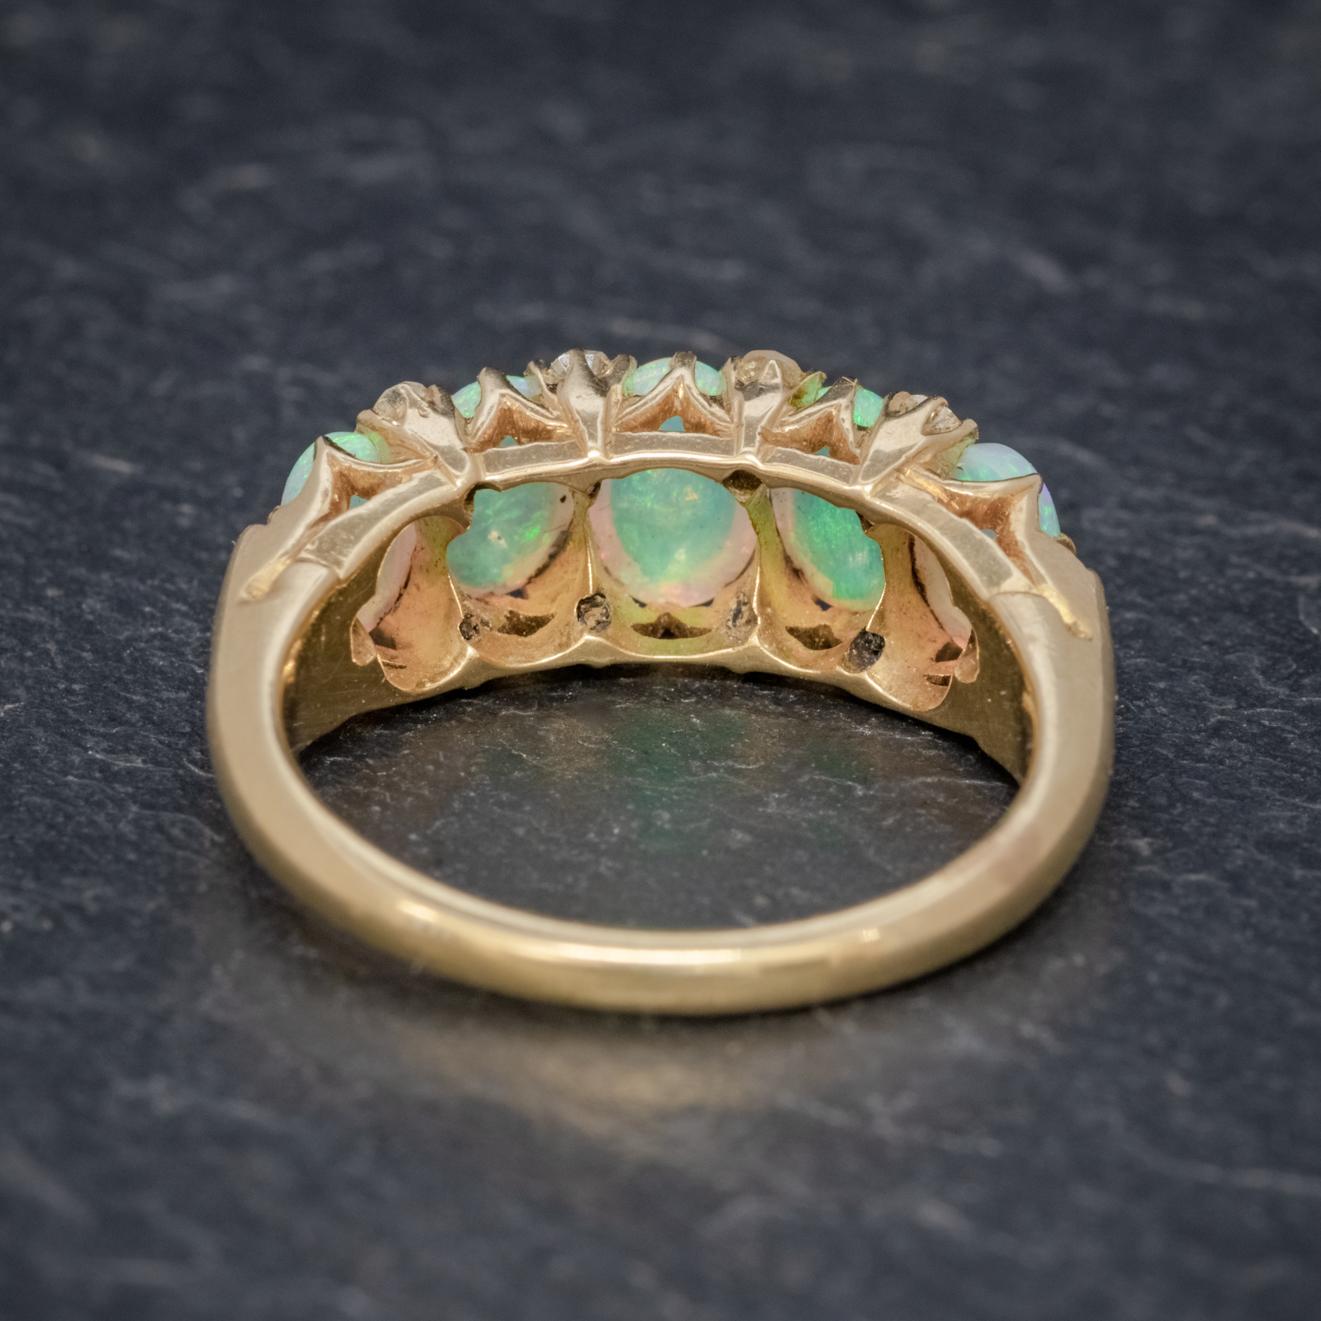 Antique Victorian Opal Diamond Ring 18 Carat Gold circa 1880 Boxed In Good Condition For Sale In Lancaster , GB